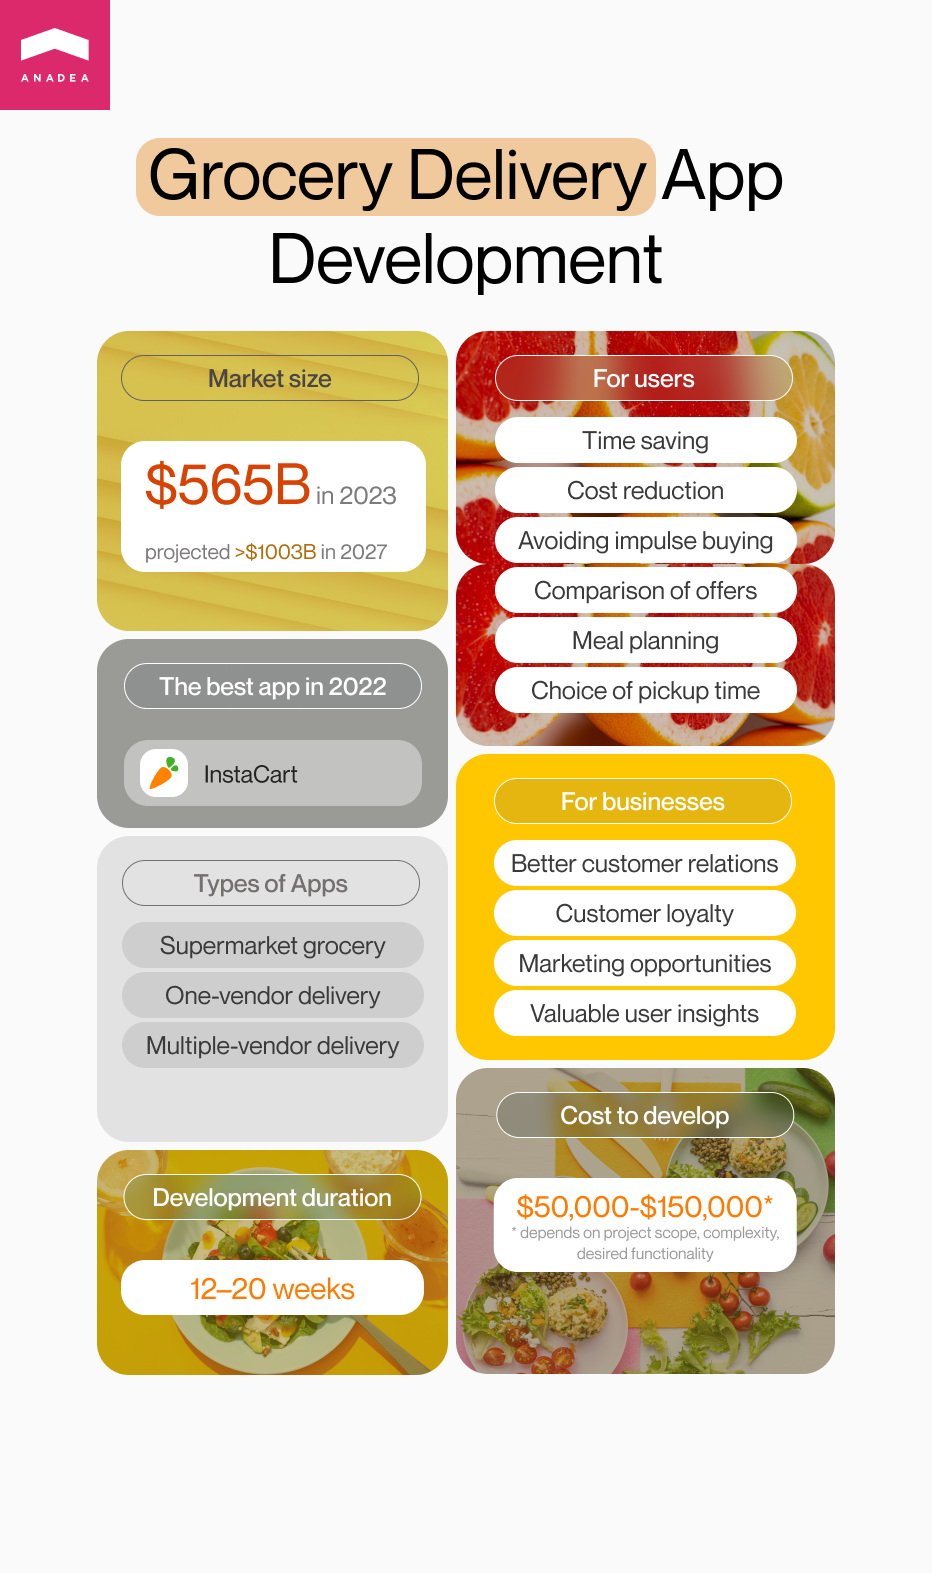 Grocery development app infographic - Market size, features, cost